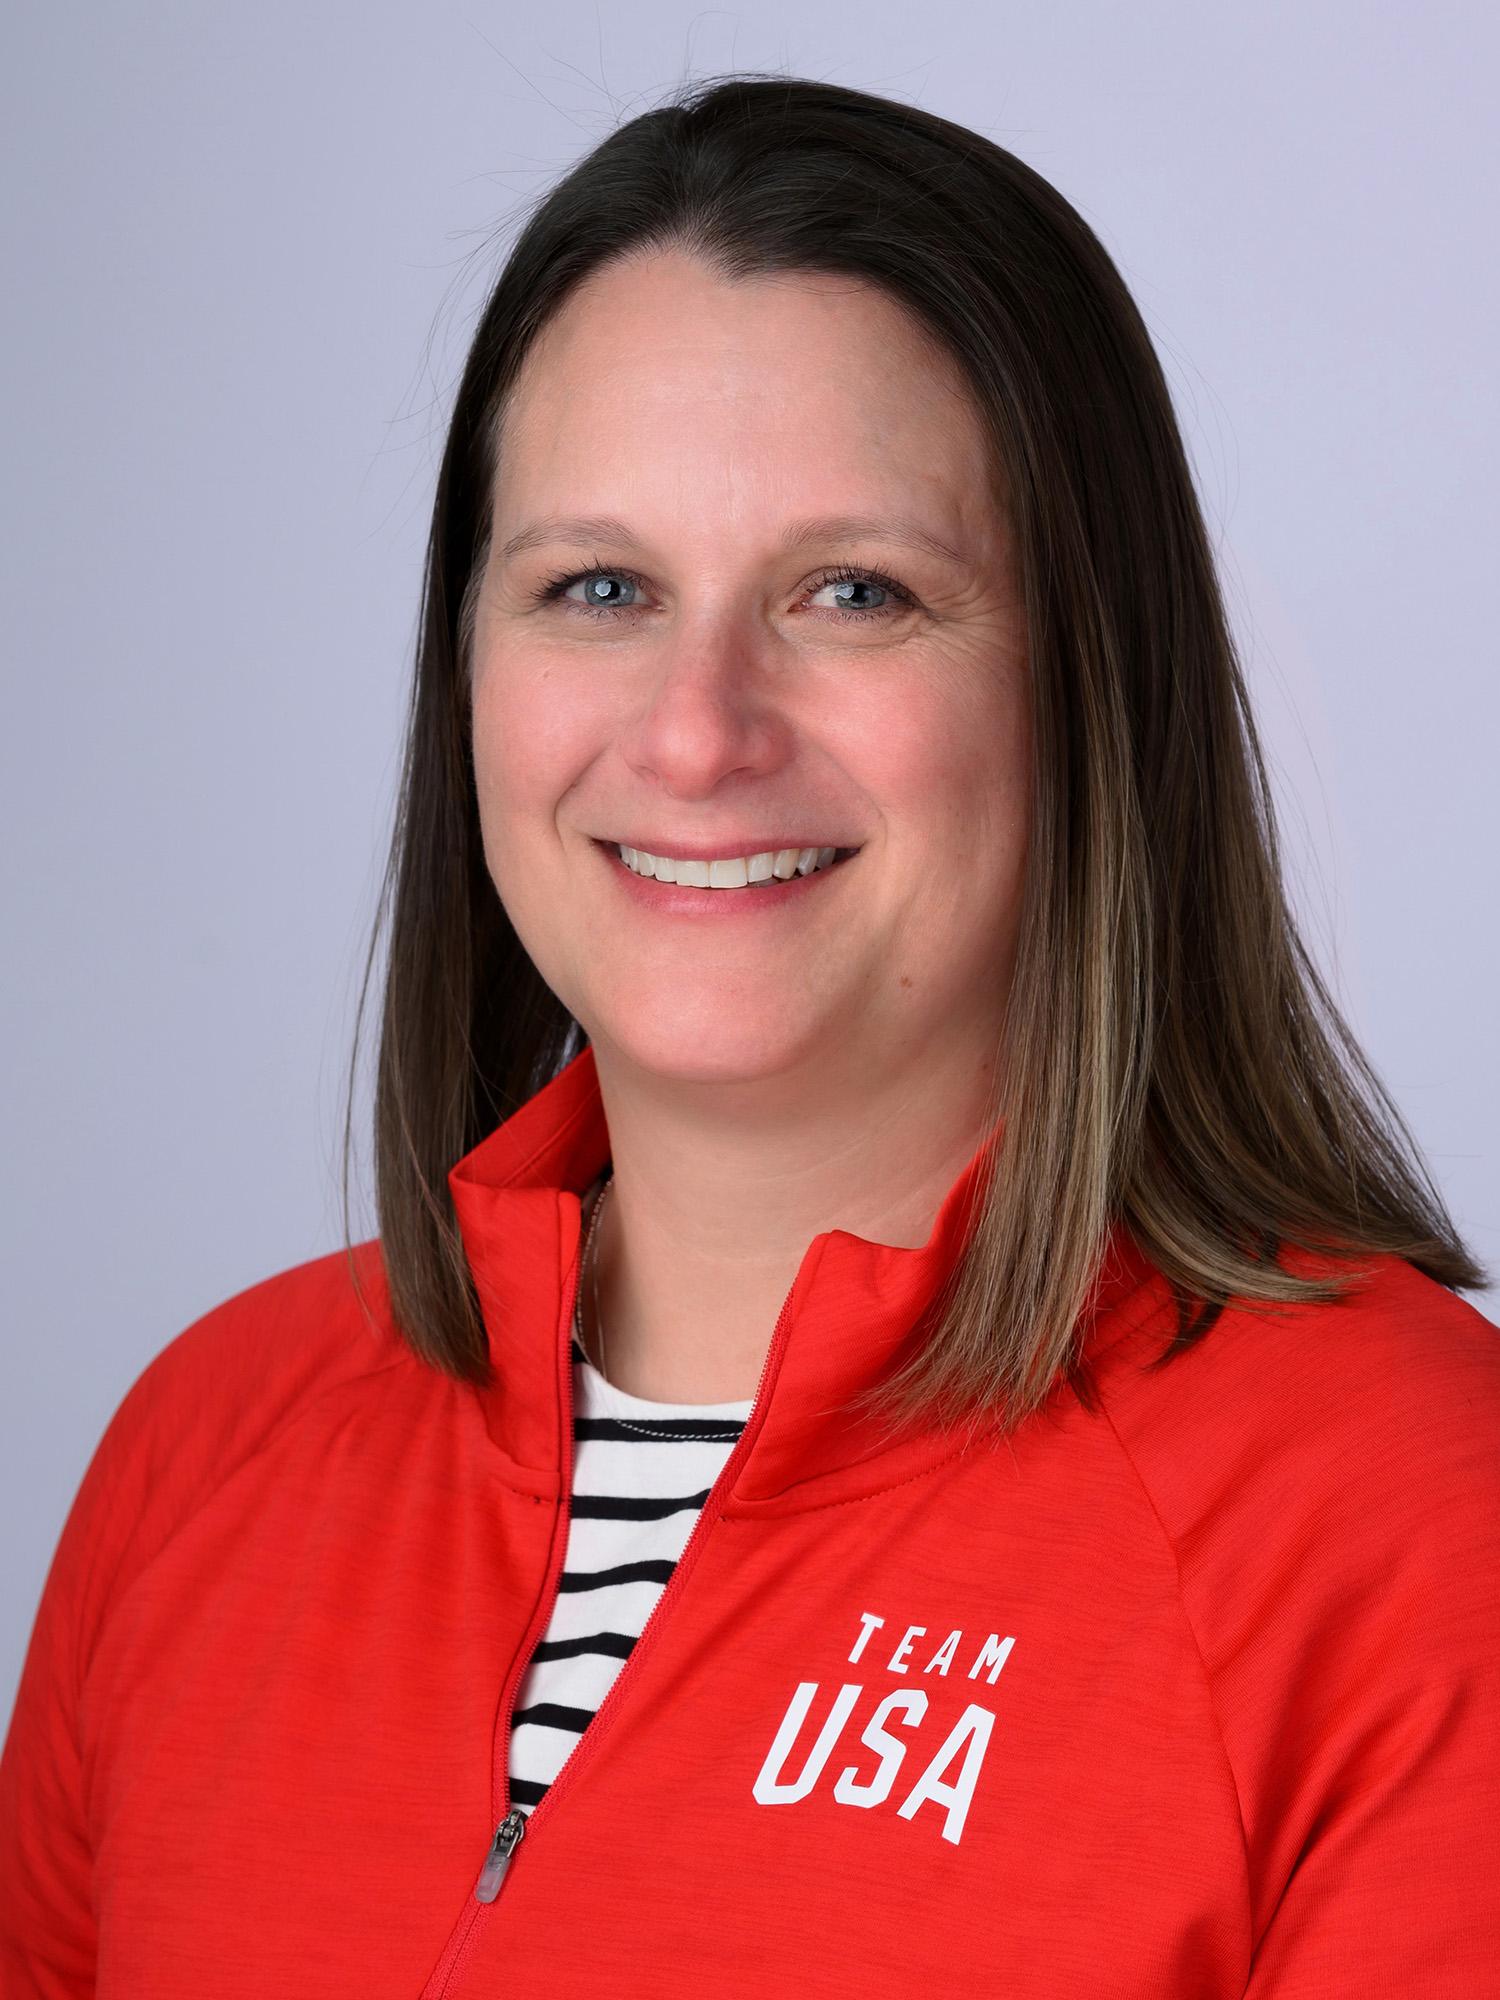 A headshot of a woman wearing a red Team USA jacket.